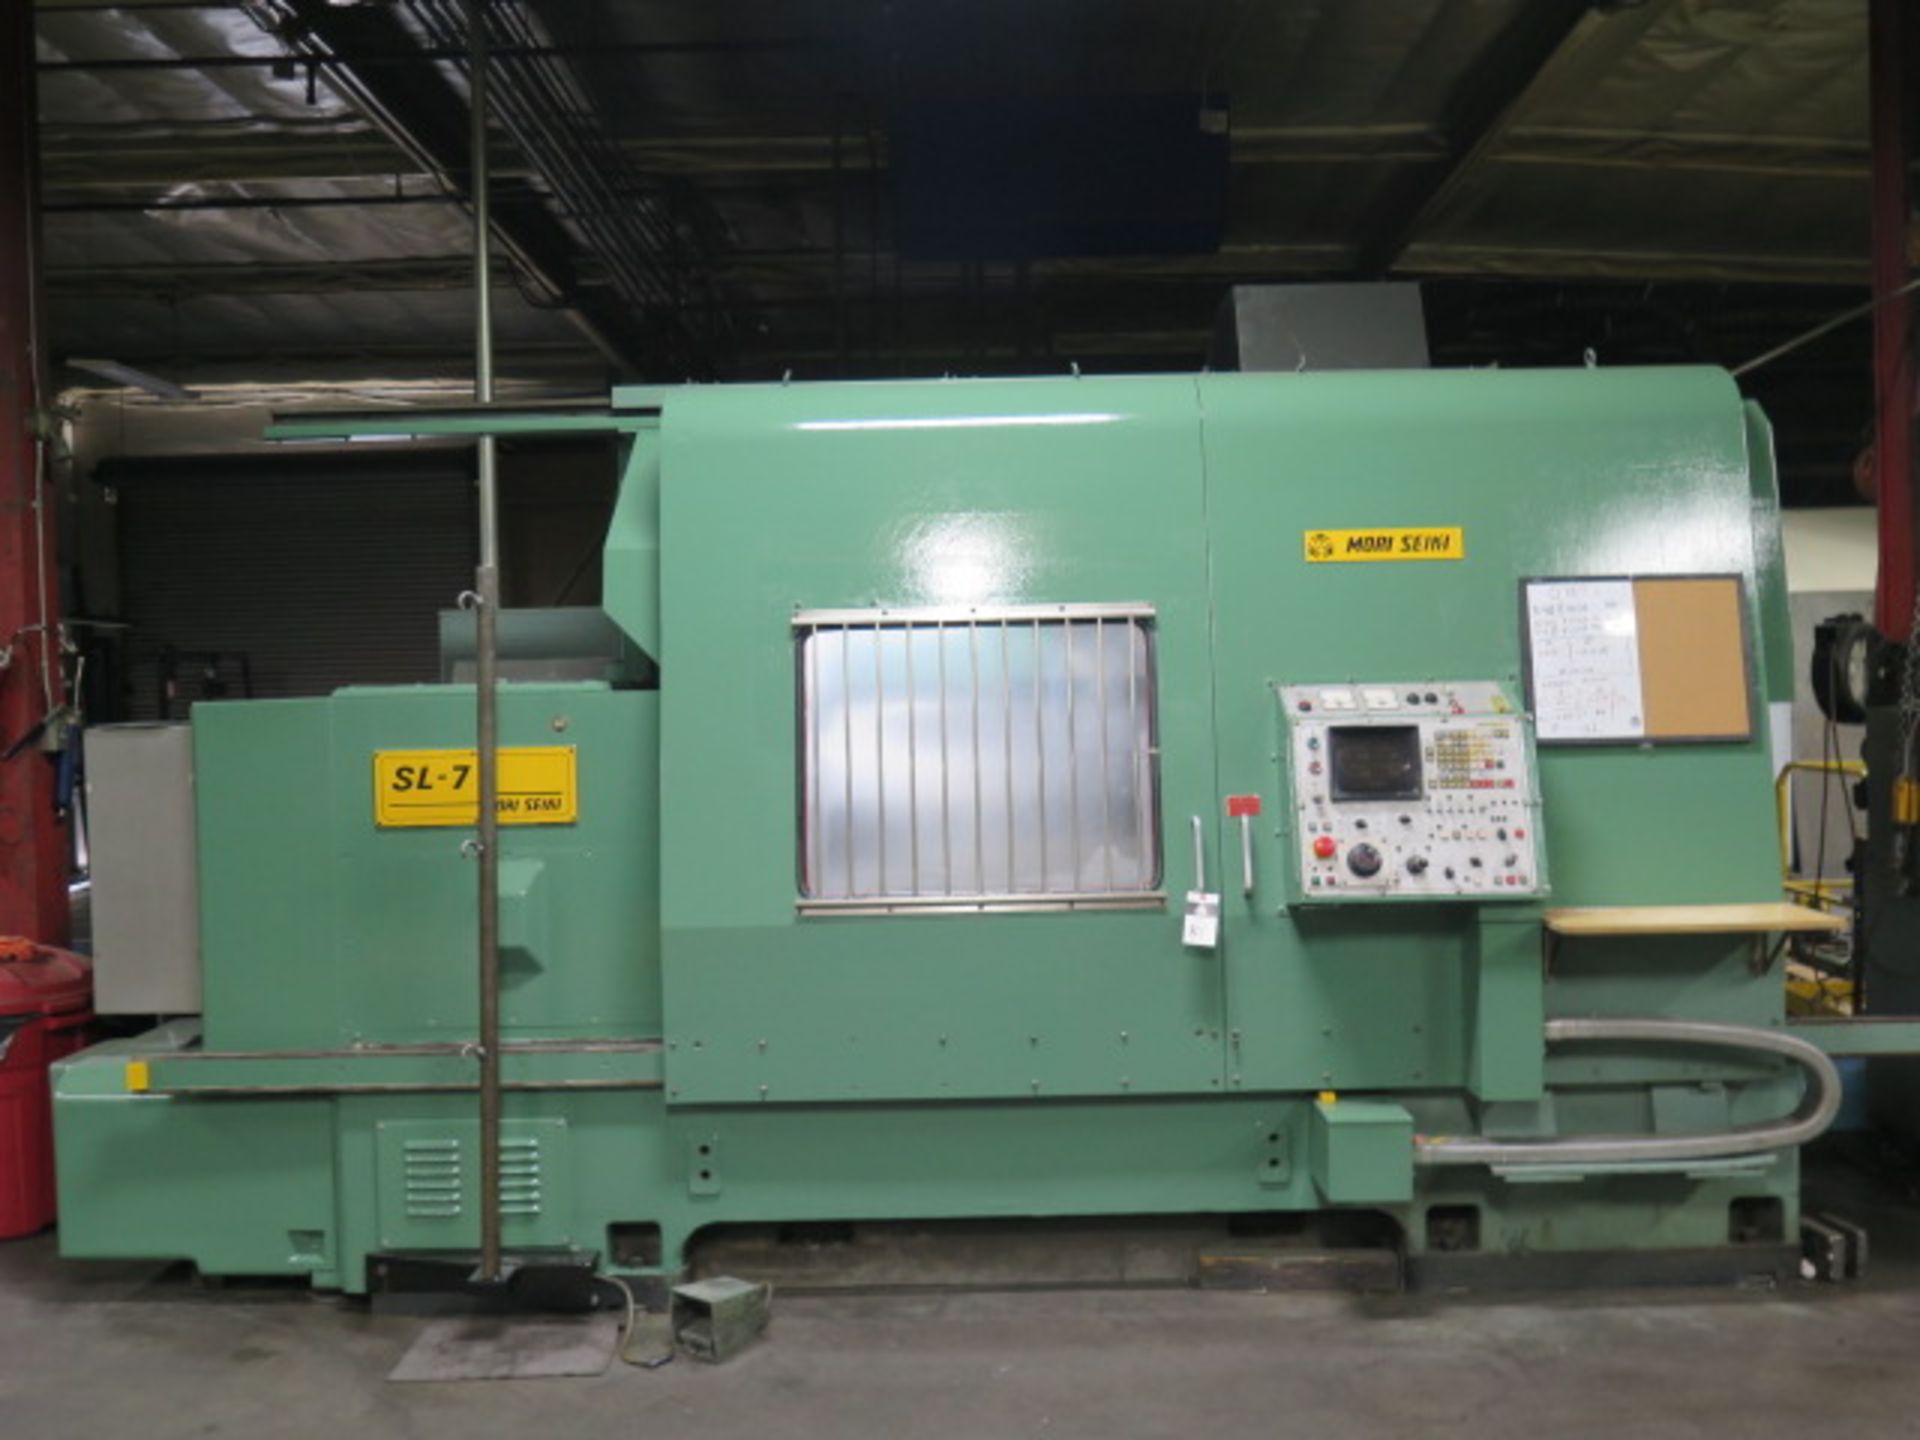 Mori Seiki SL-7C CNC Turning Center s/n 2300 w/ Fanuc System 6T Controls, 12-St Turret, SOLD AS IS